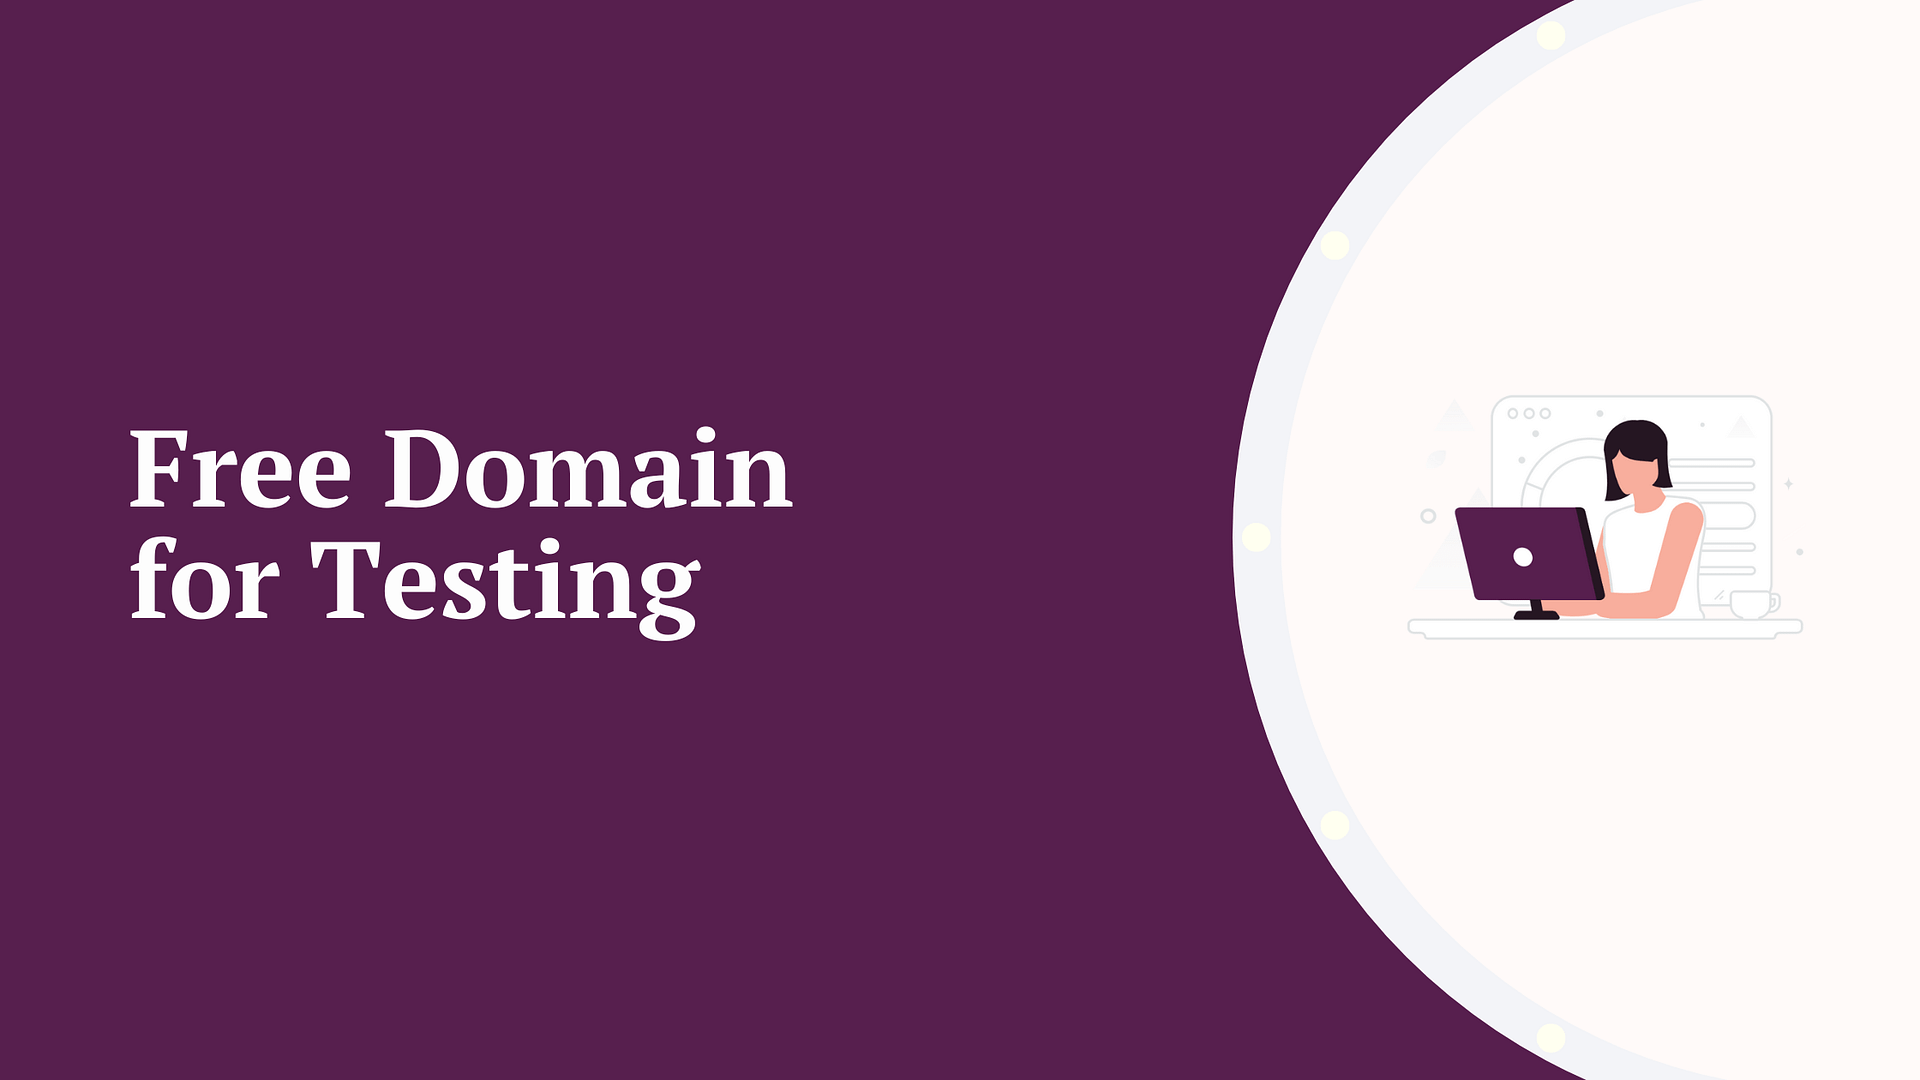 What Are The 5 Main Benefits Of Free Domain